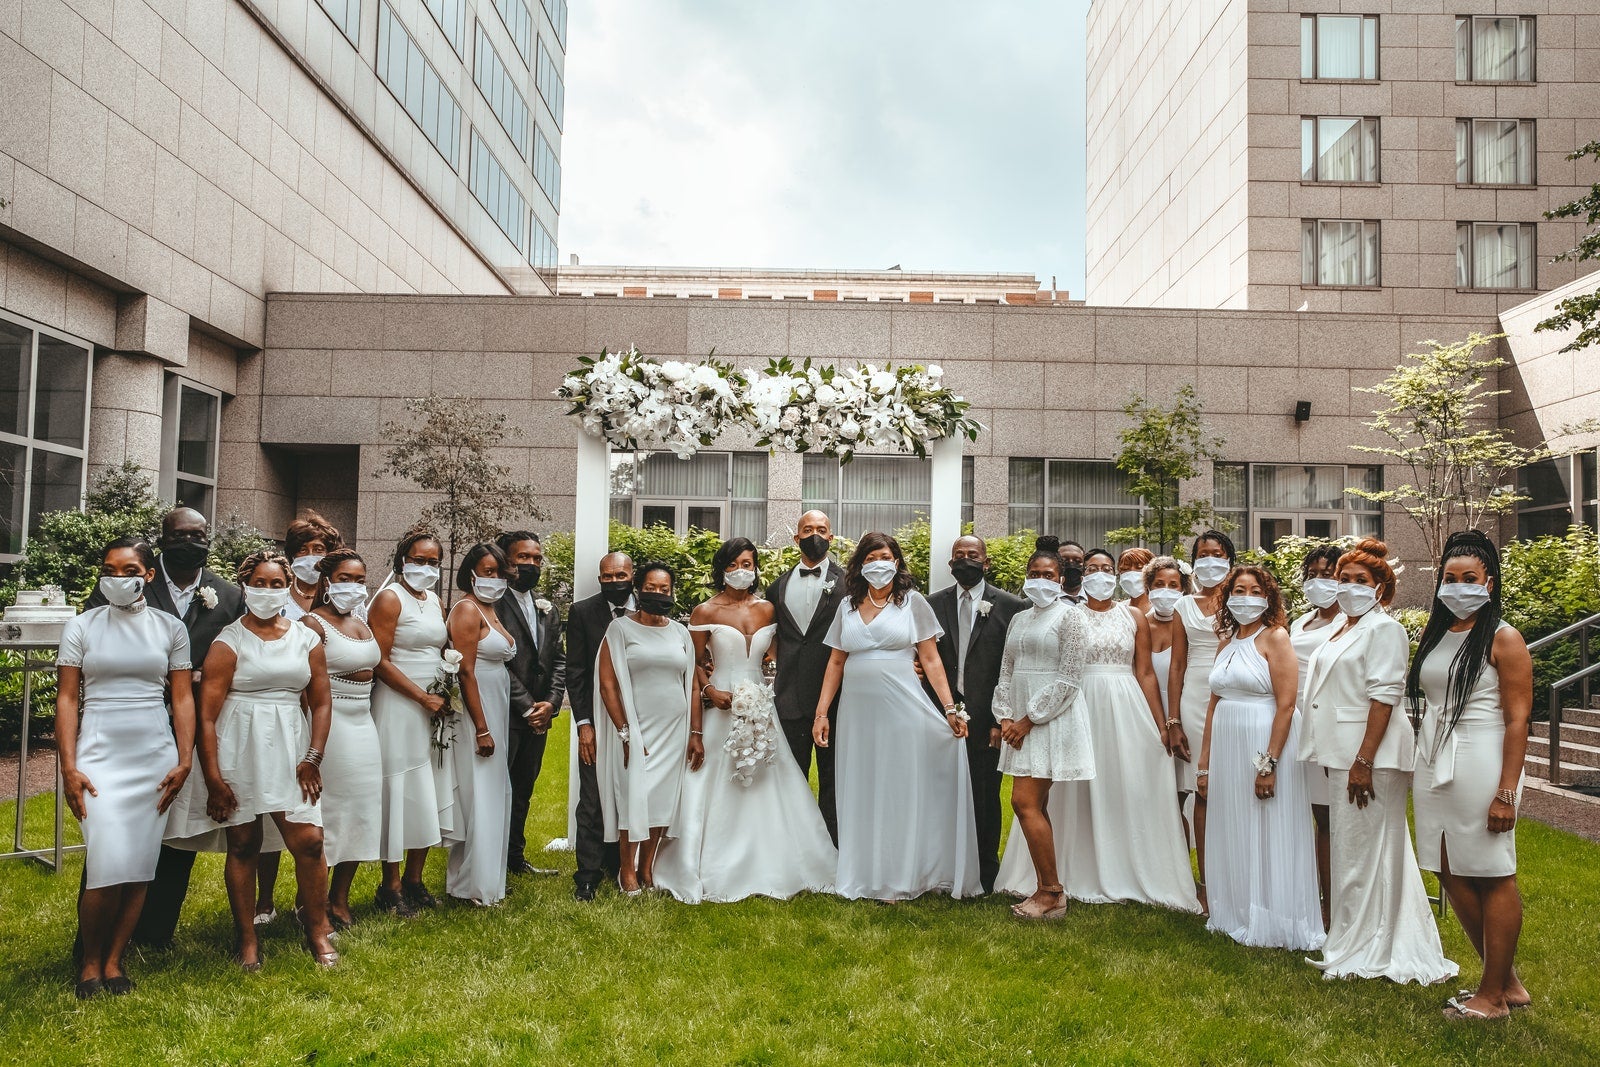 This Couple Said 'I Do' In Philadelphia During The Black Lives Matter Protest